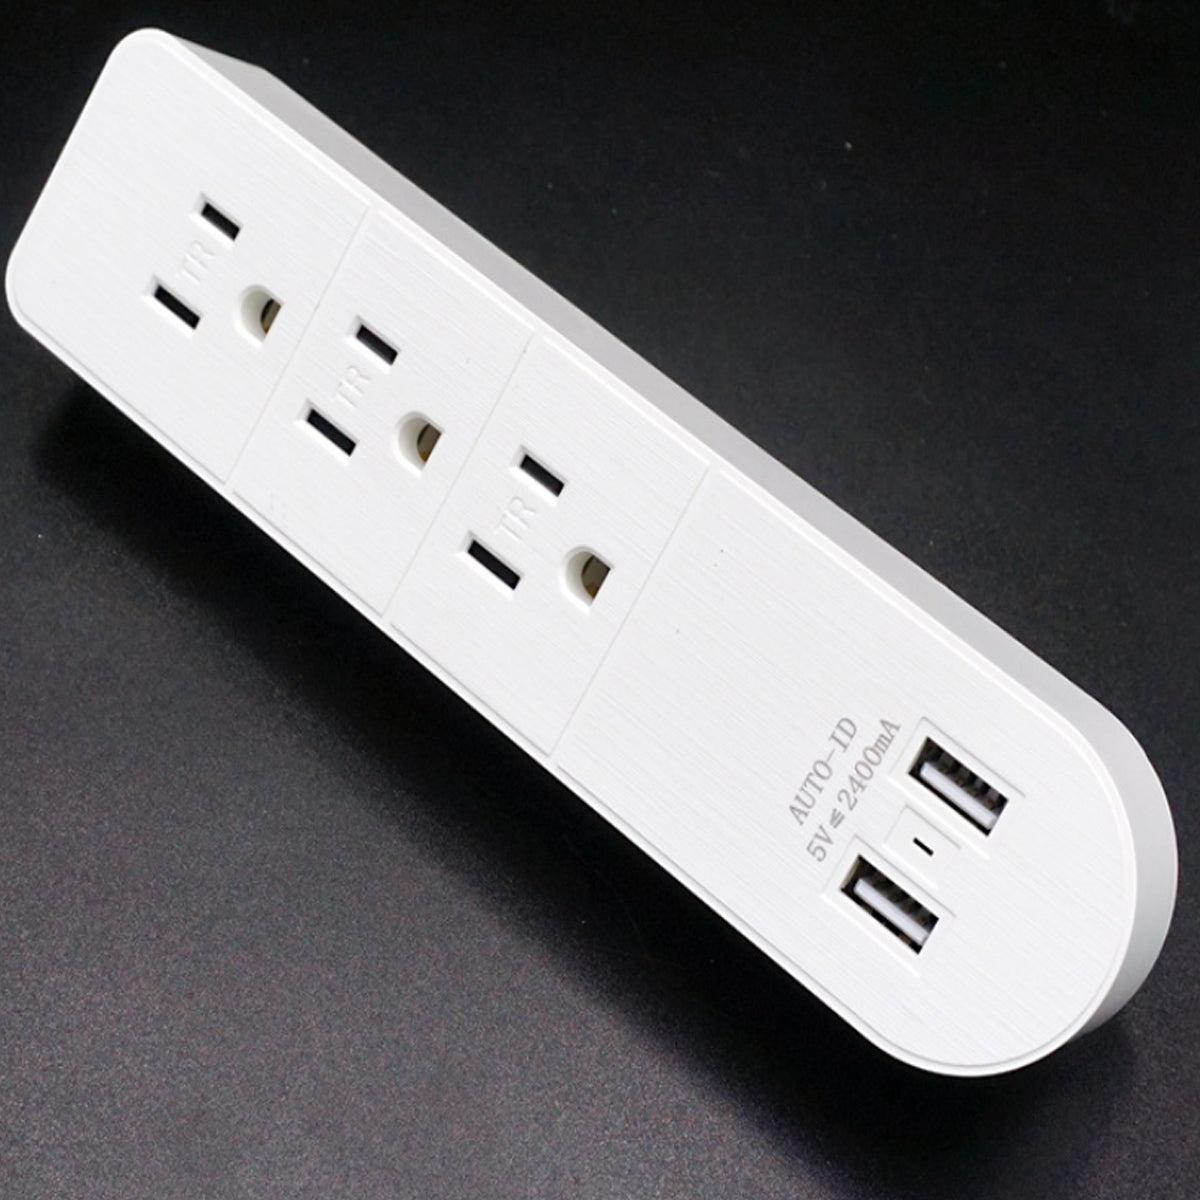 Versatile Multi Outlet AC Plus Fast USB Charger With Surge Protection by VistaShops